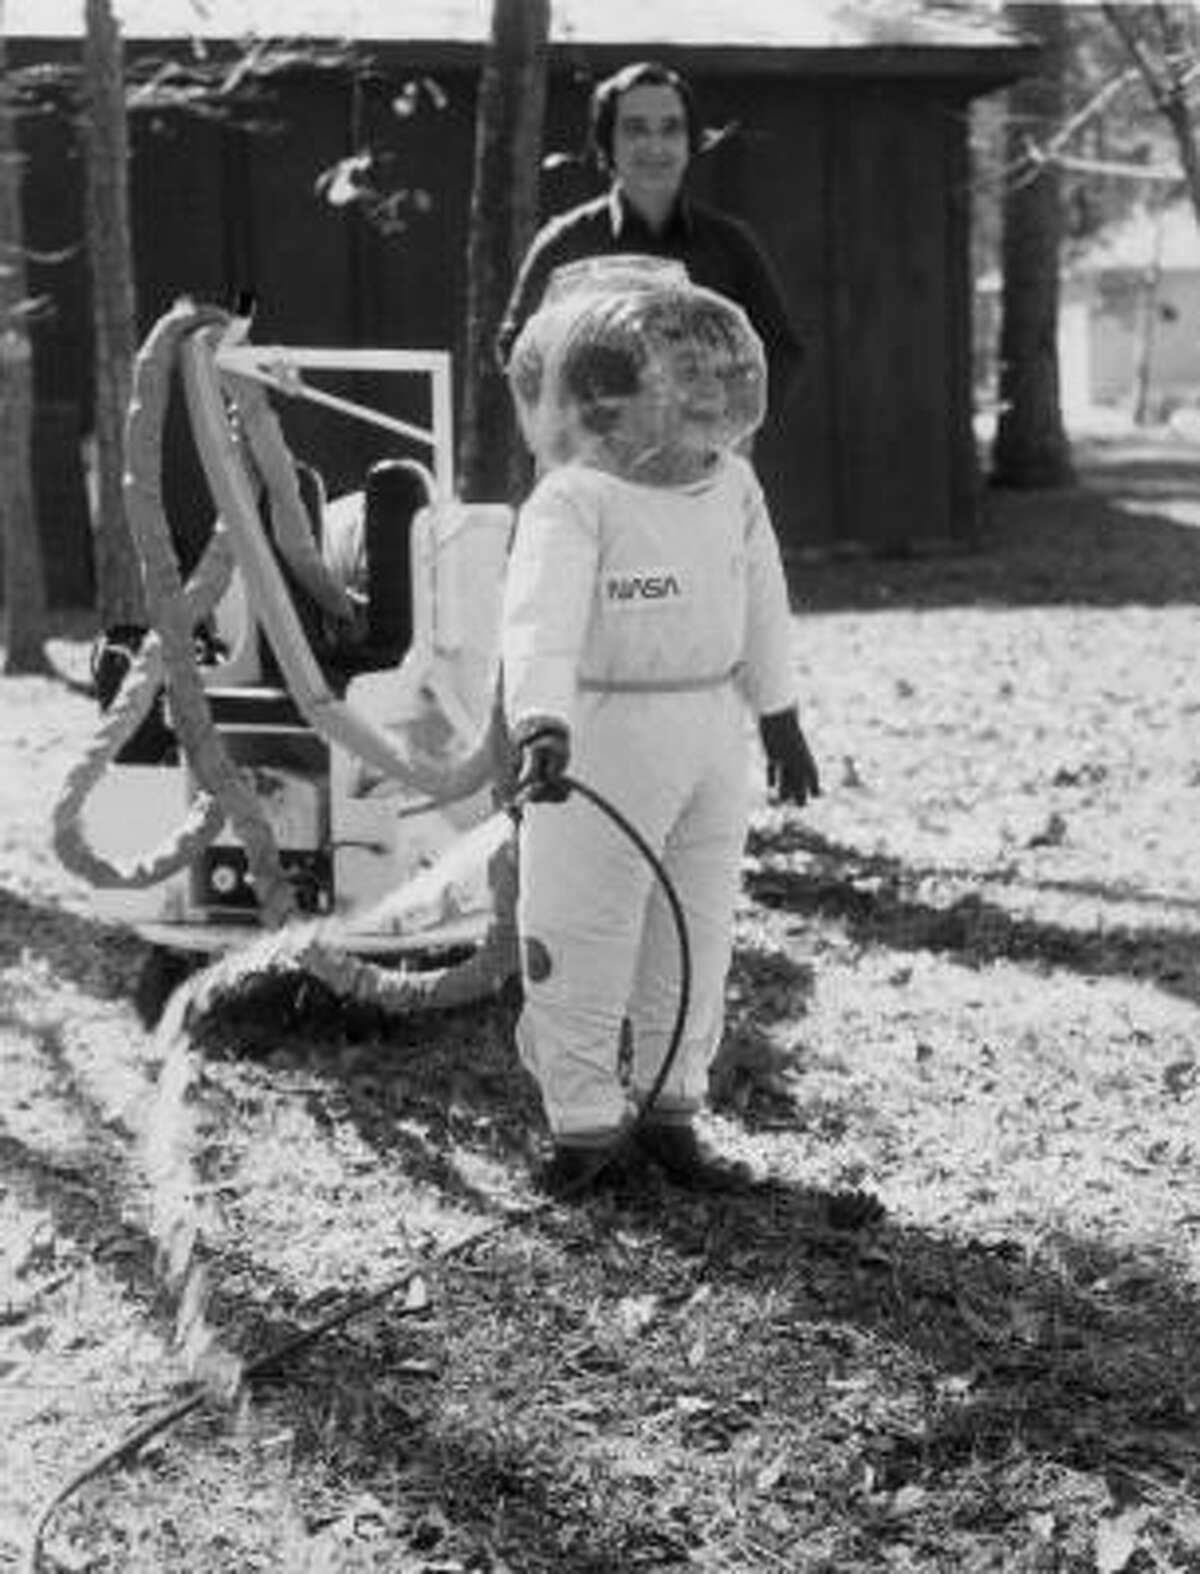 David Vetter took his first walk outside in 1977, wearing a spacesuit designed by engineers at the Johnson Space Center.